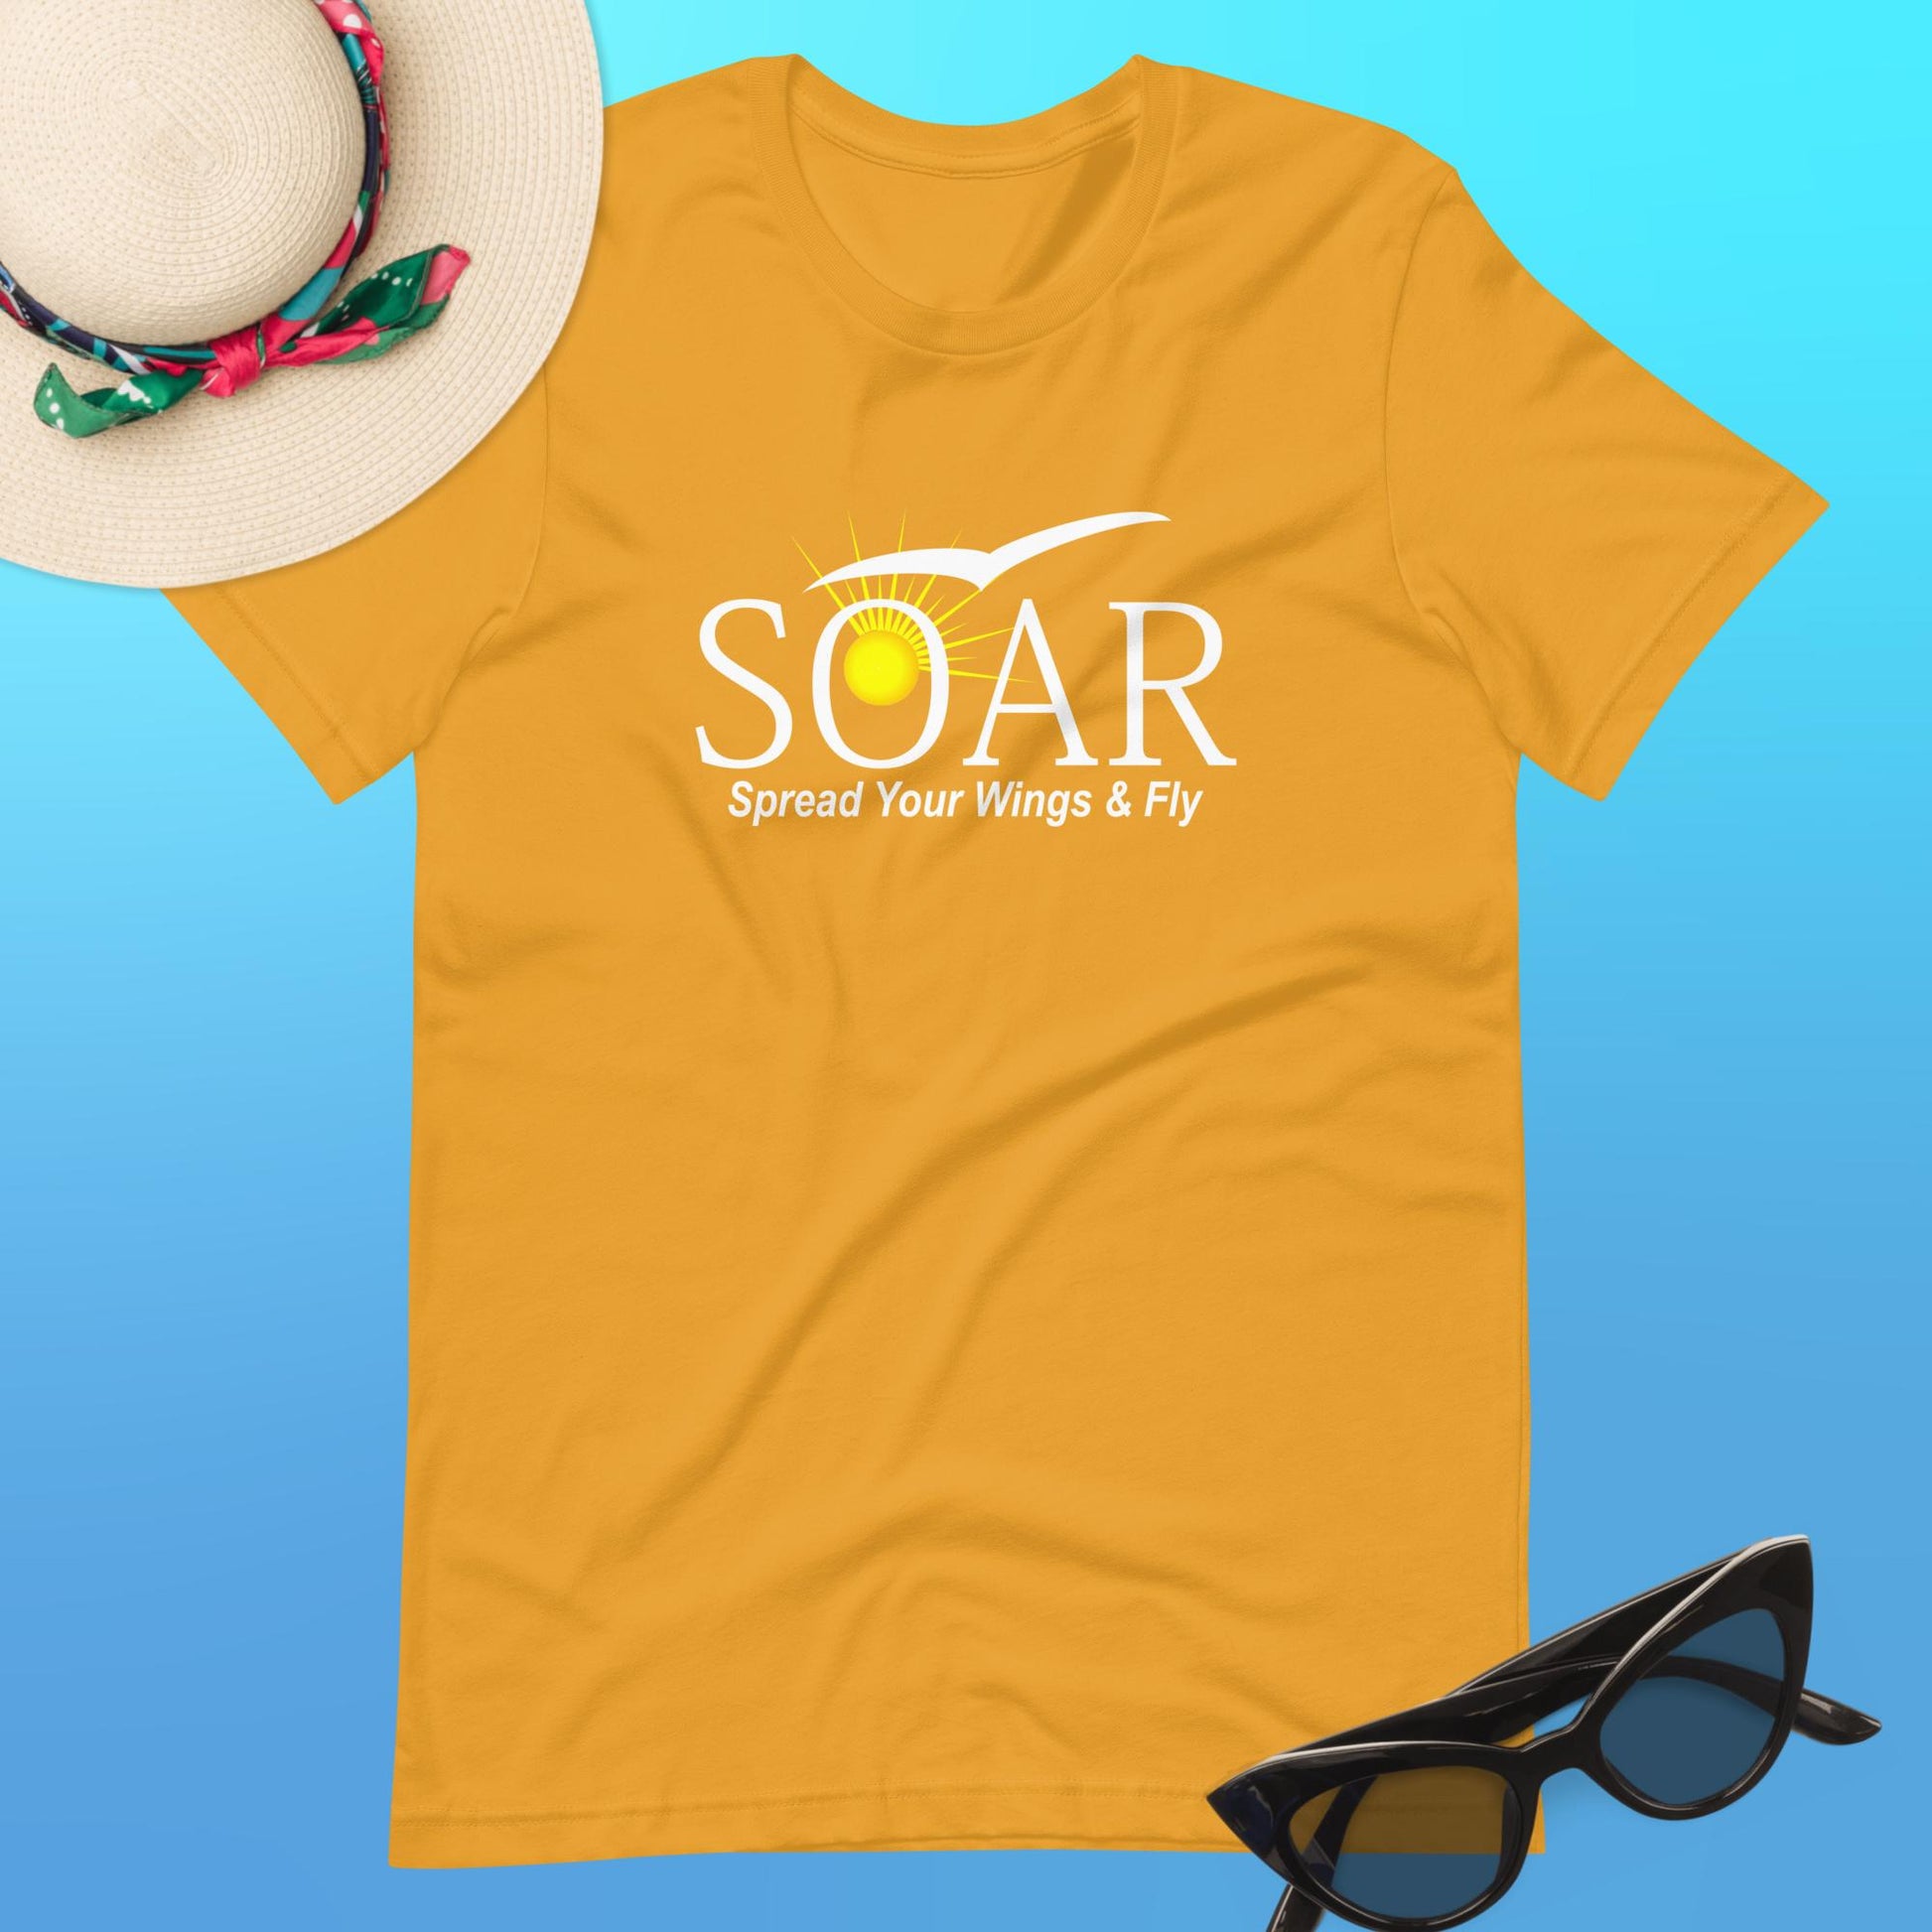 "Mustard Yellow T-Shirt featuring 'SOAR' Graphic: Sun and Seagull Design Encouraging Flight. 'Spread your wings & fly' - Available at PuraFashions.com. Flat-lay image displaying the front design."